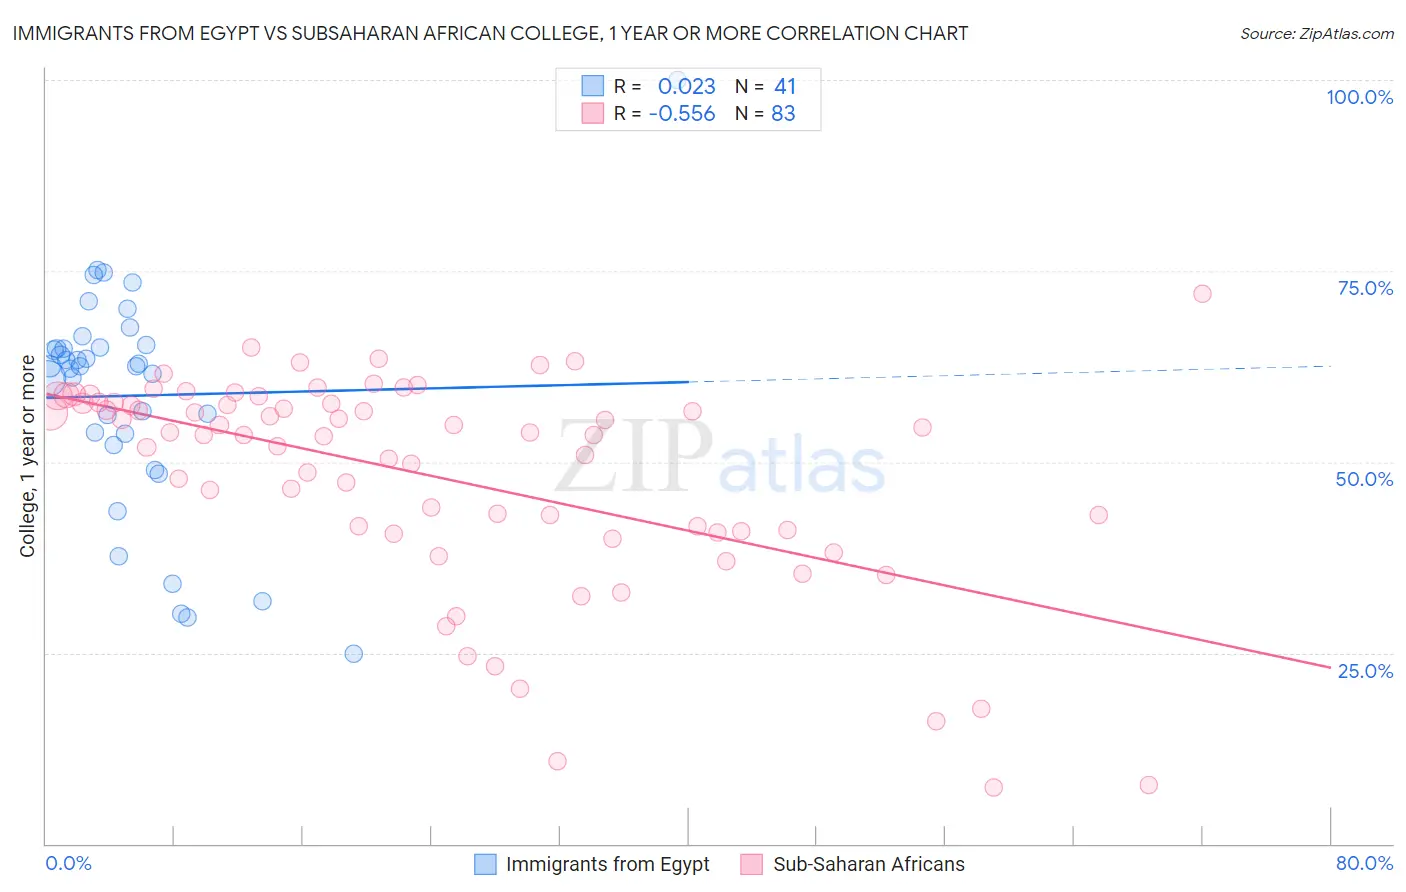 Immigrants from Egypt vs Subsaharan African College, 1 year or more